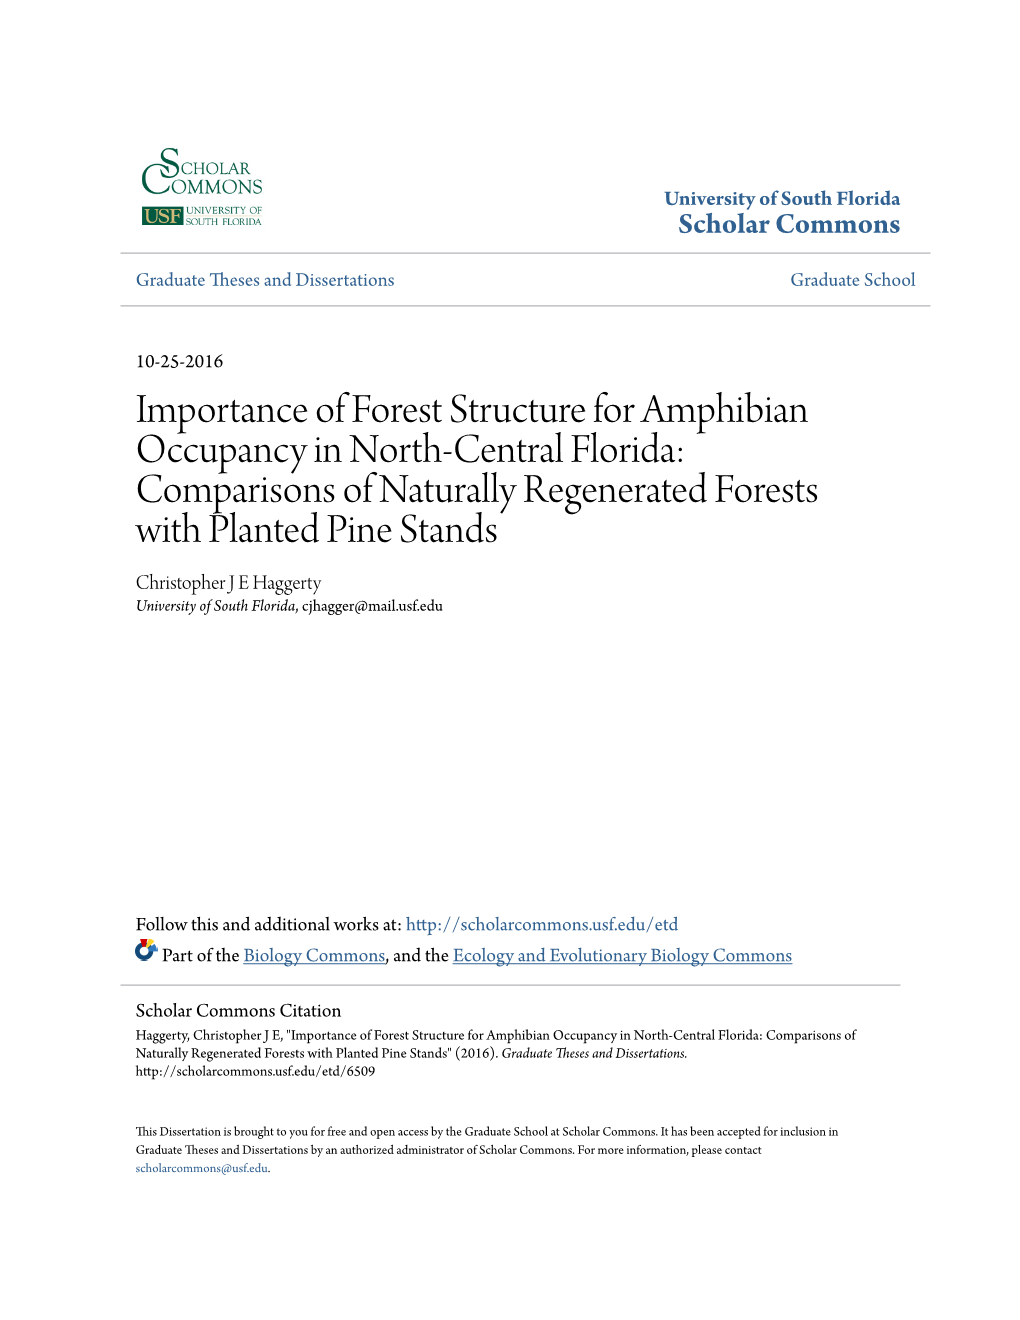 Importance of Forest Structure for Amphibian Occupancy in North